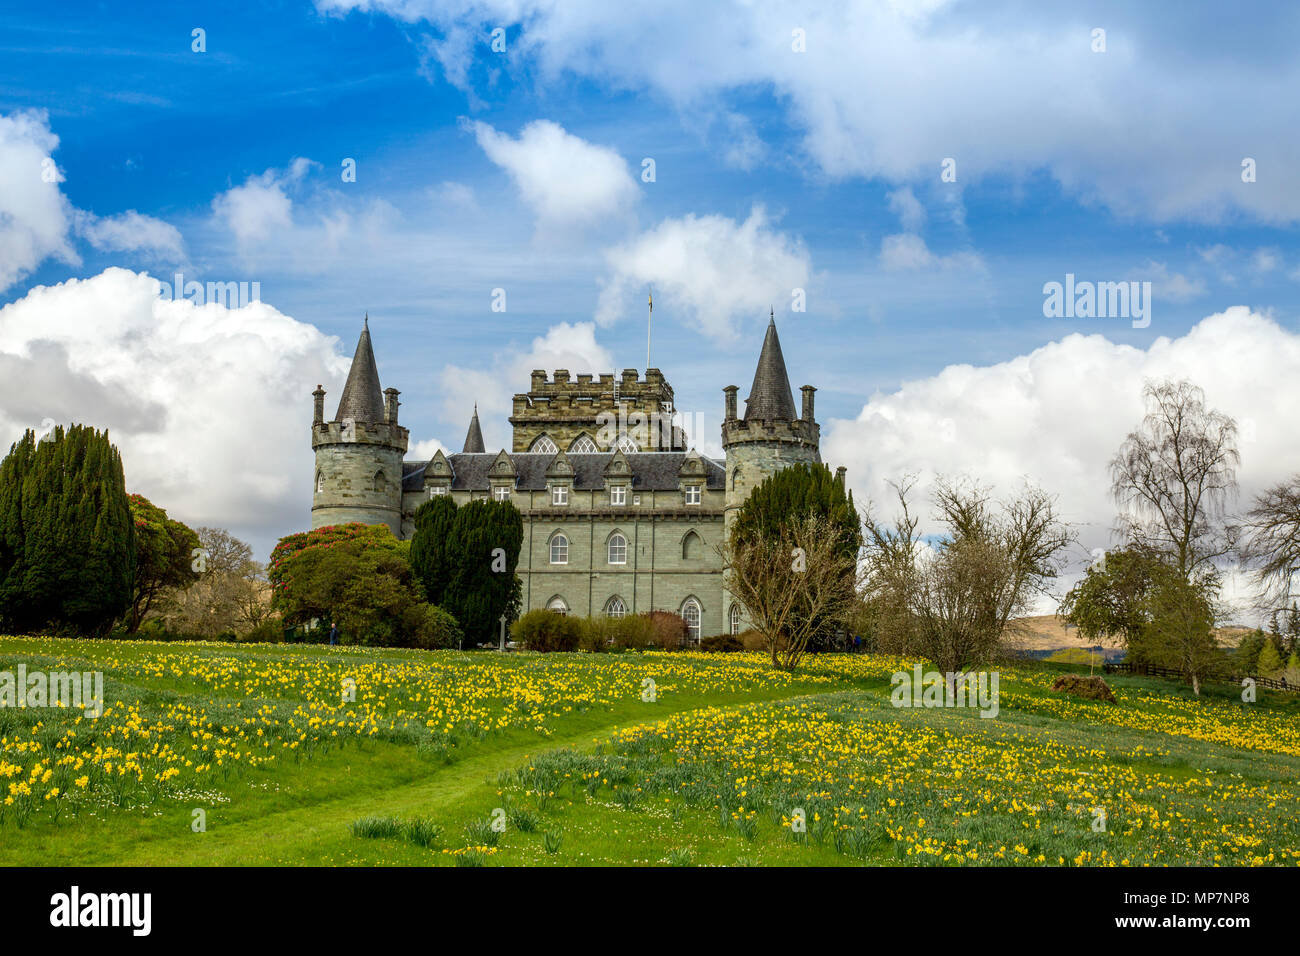 Daffodils in the grounds of historic Inveraray Castle, seat of the Clan Campbell, which stands on the shores of Loch Fyne, Argyll & Bute, Scotland, UK Stock Photo